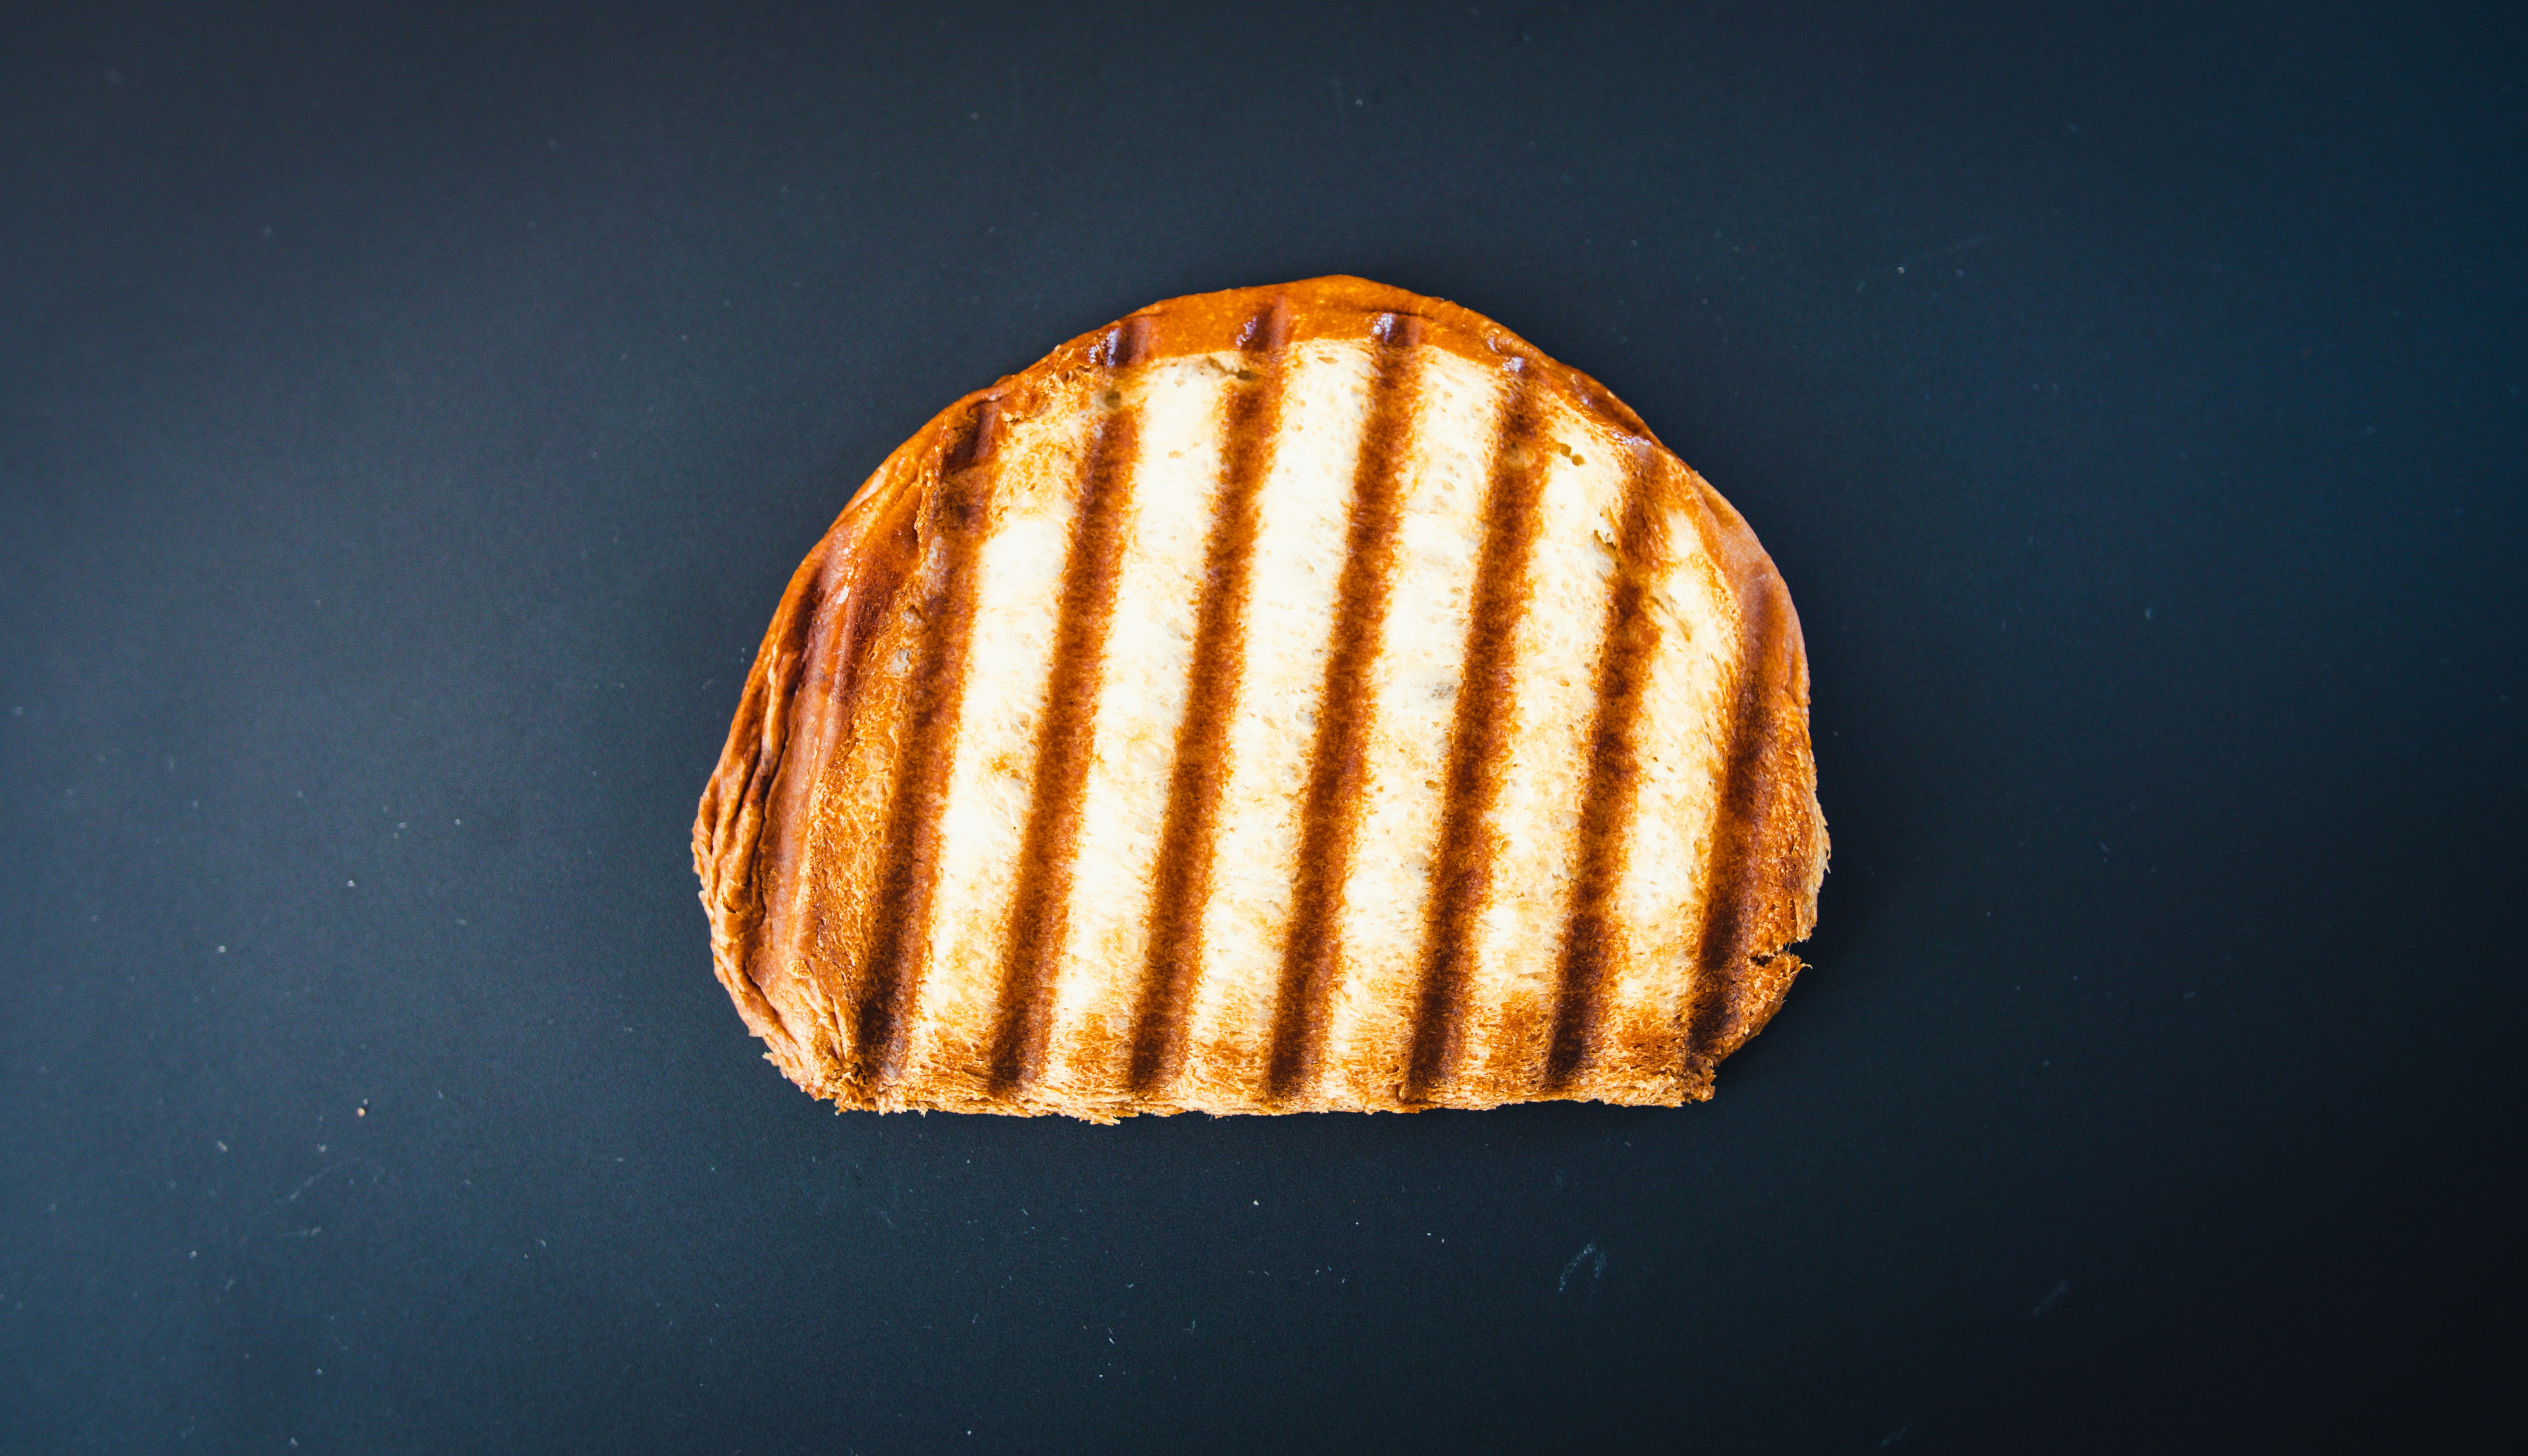 brown and white bread on black surface